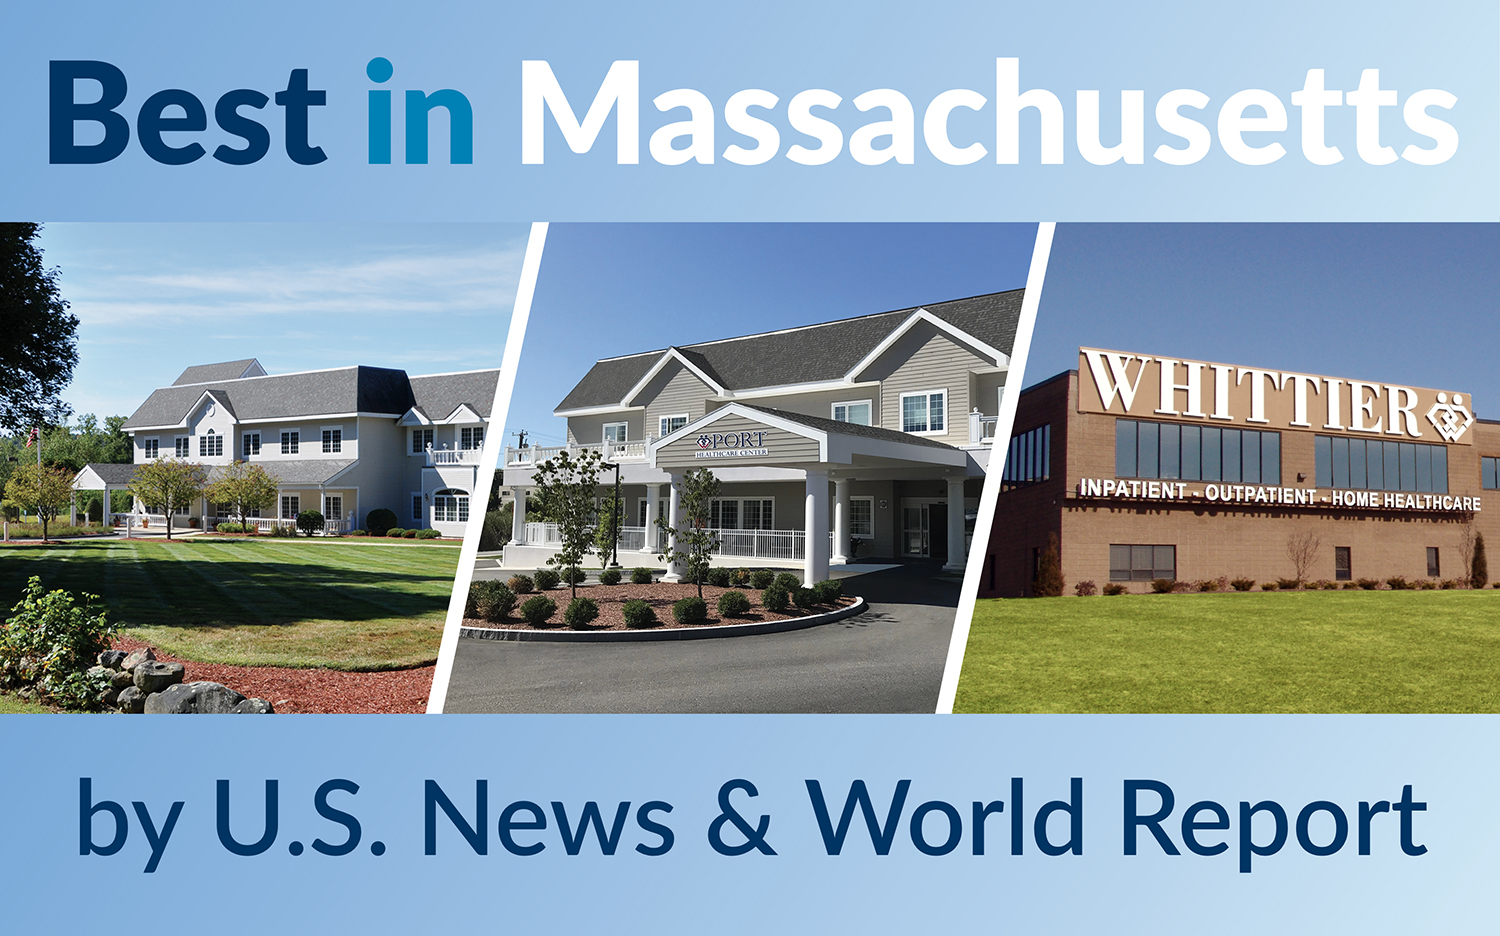 Three Whittier Health Network facilities have been rated among Best in Massachusetts by U.S. News & World Report